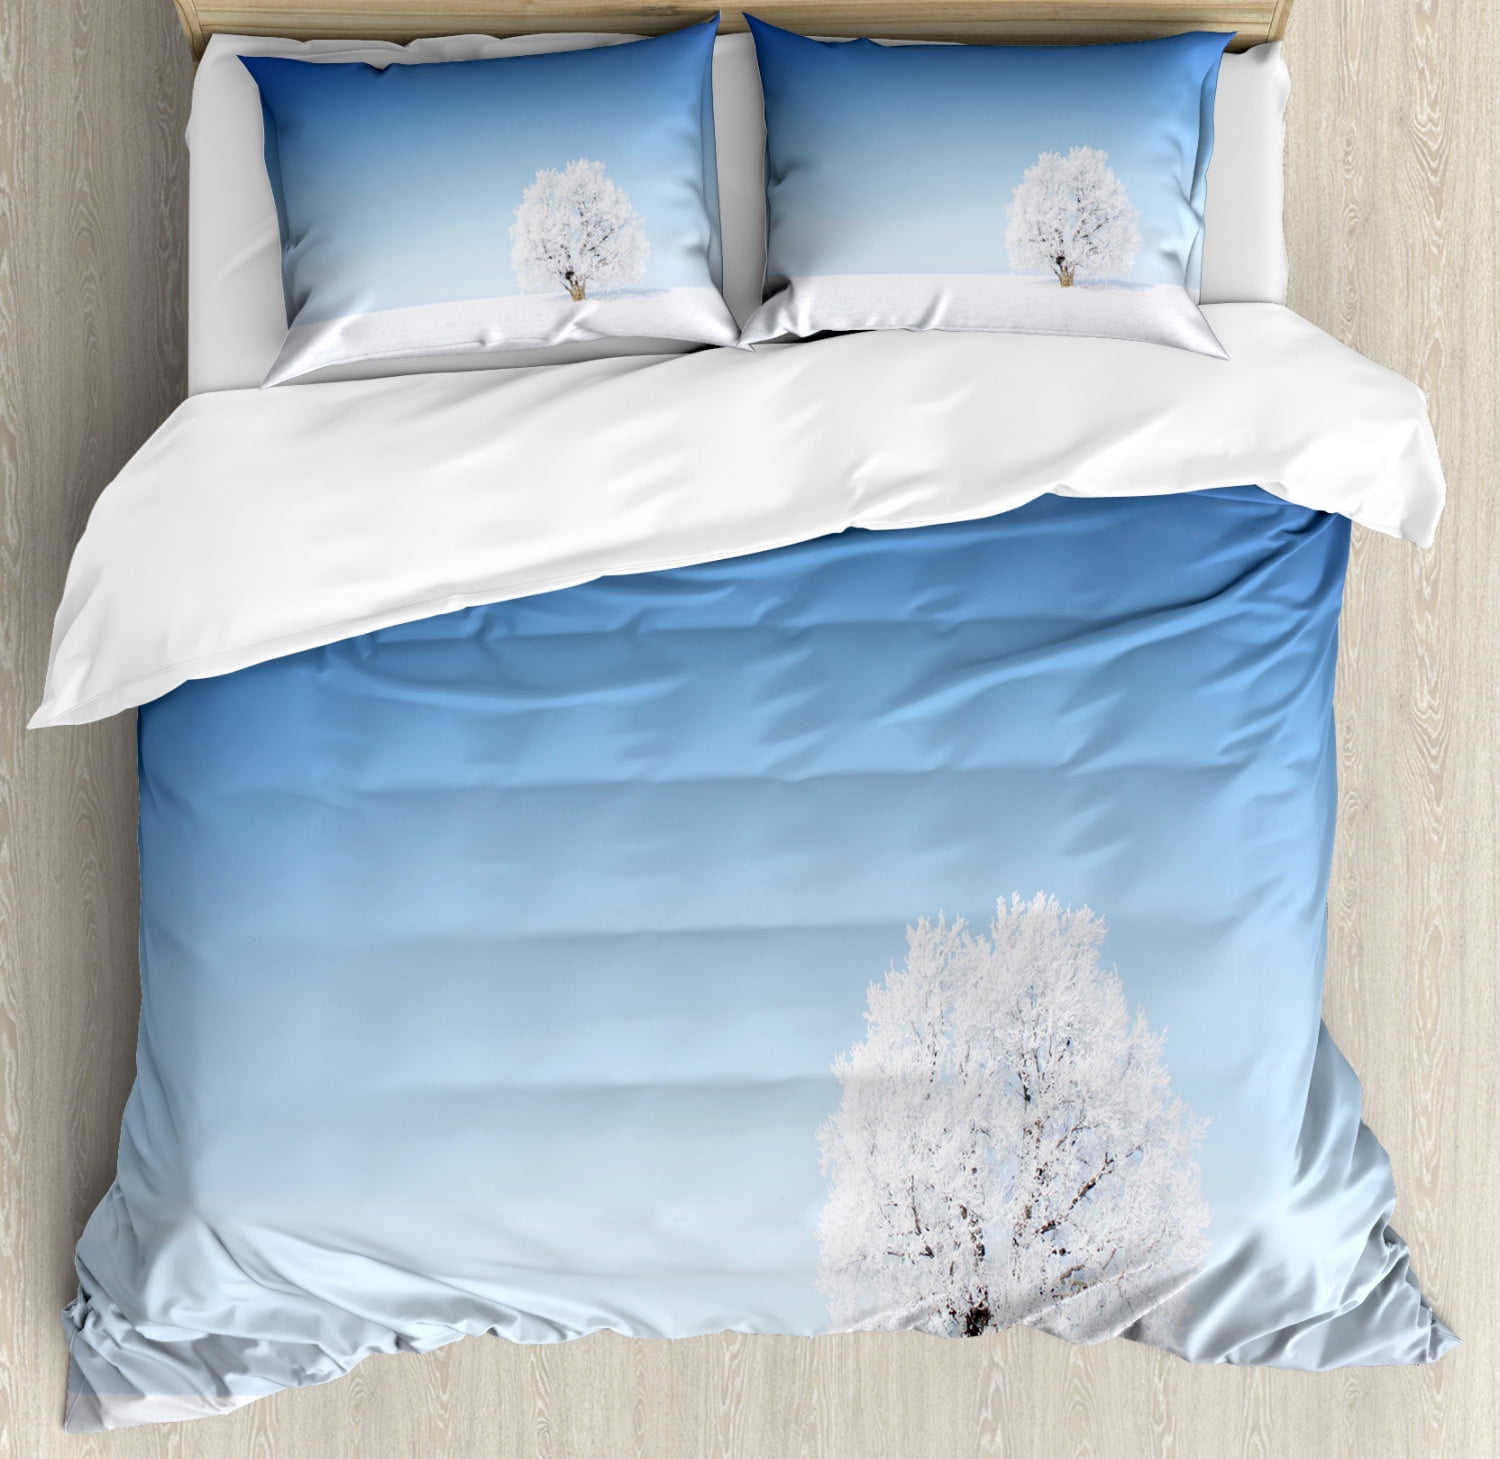 Winter Decorations Queen Size Duvet, Can You Use A Duvet Cover Alone